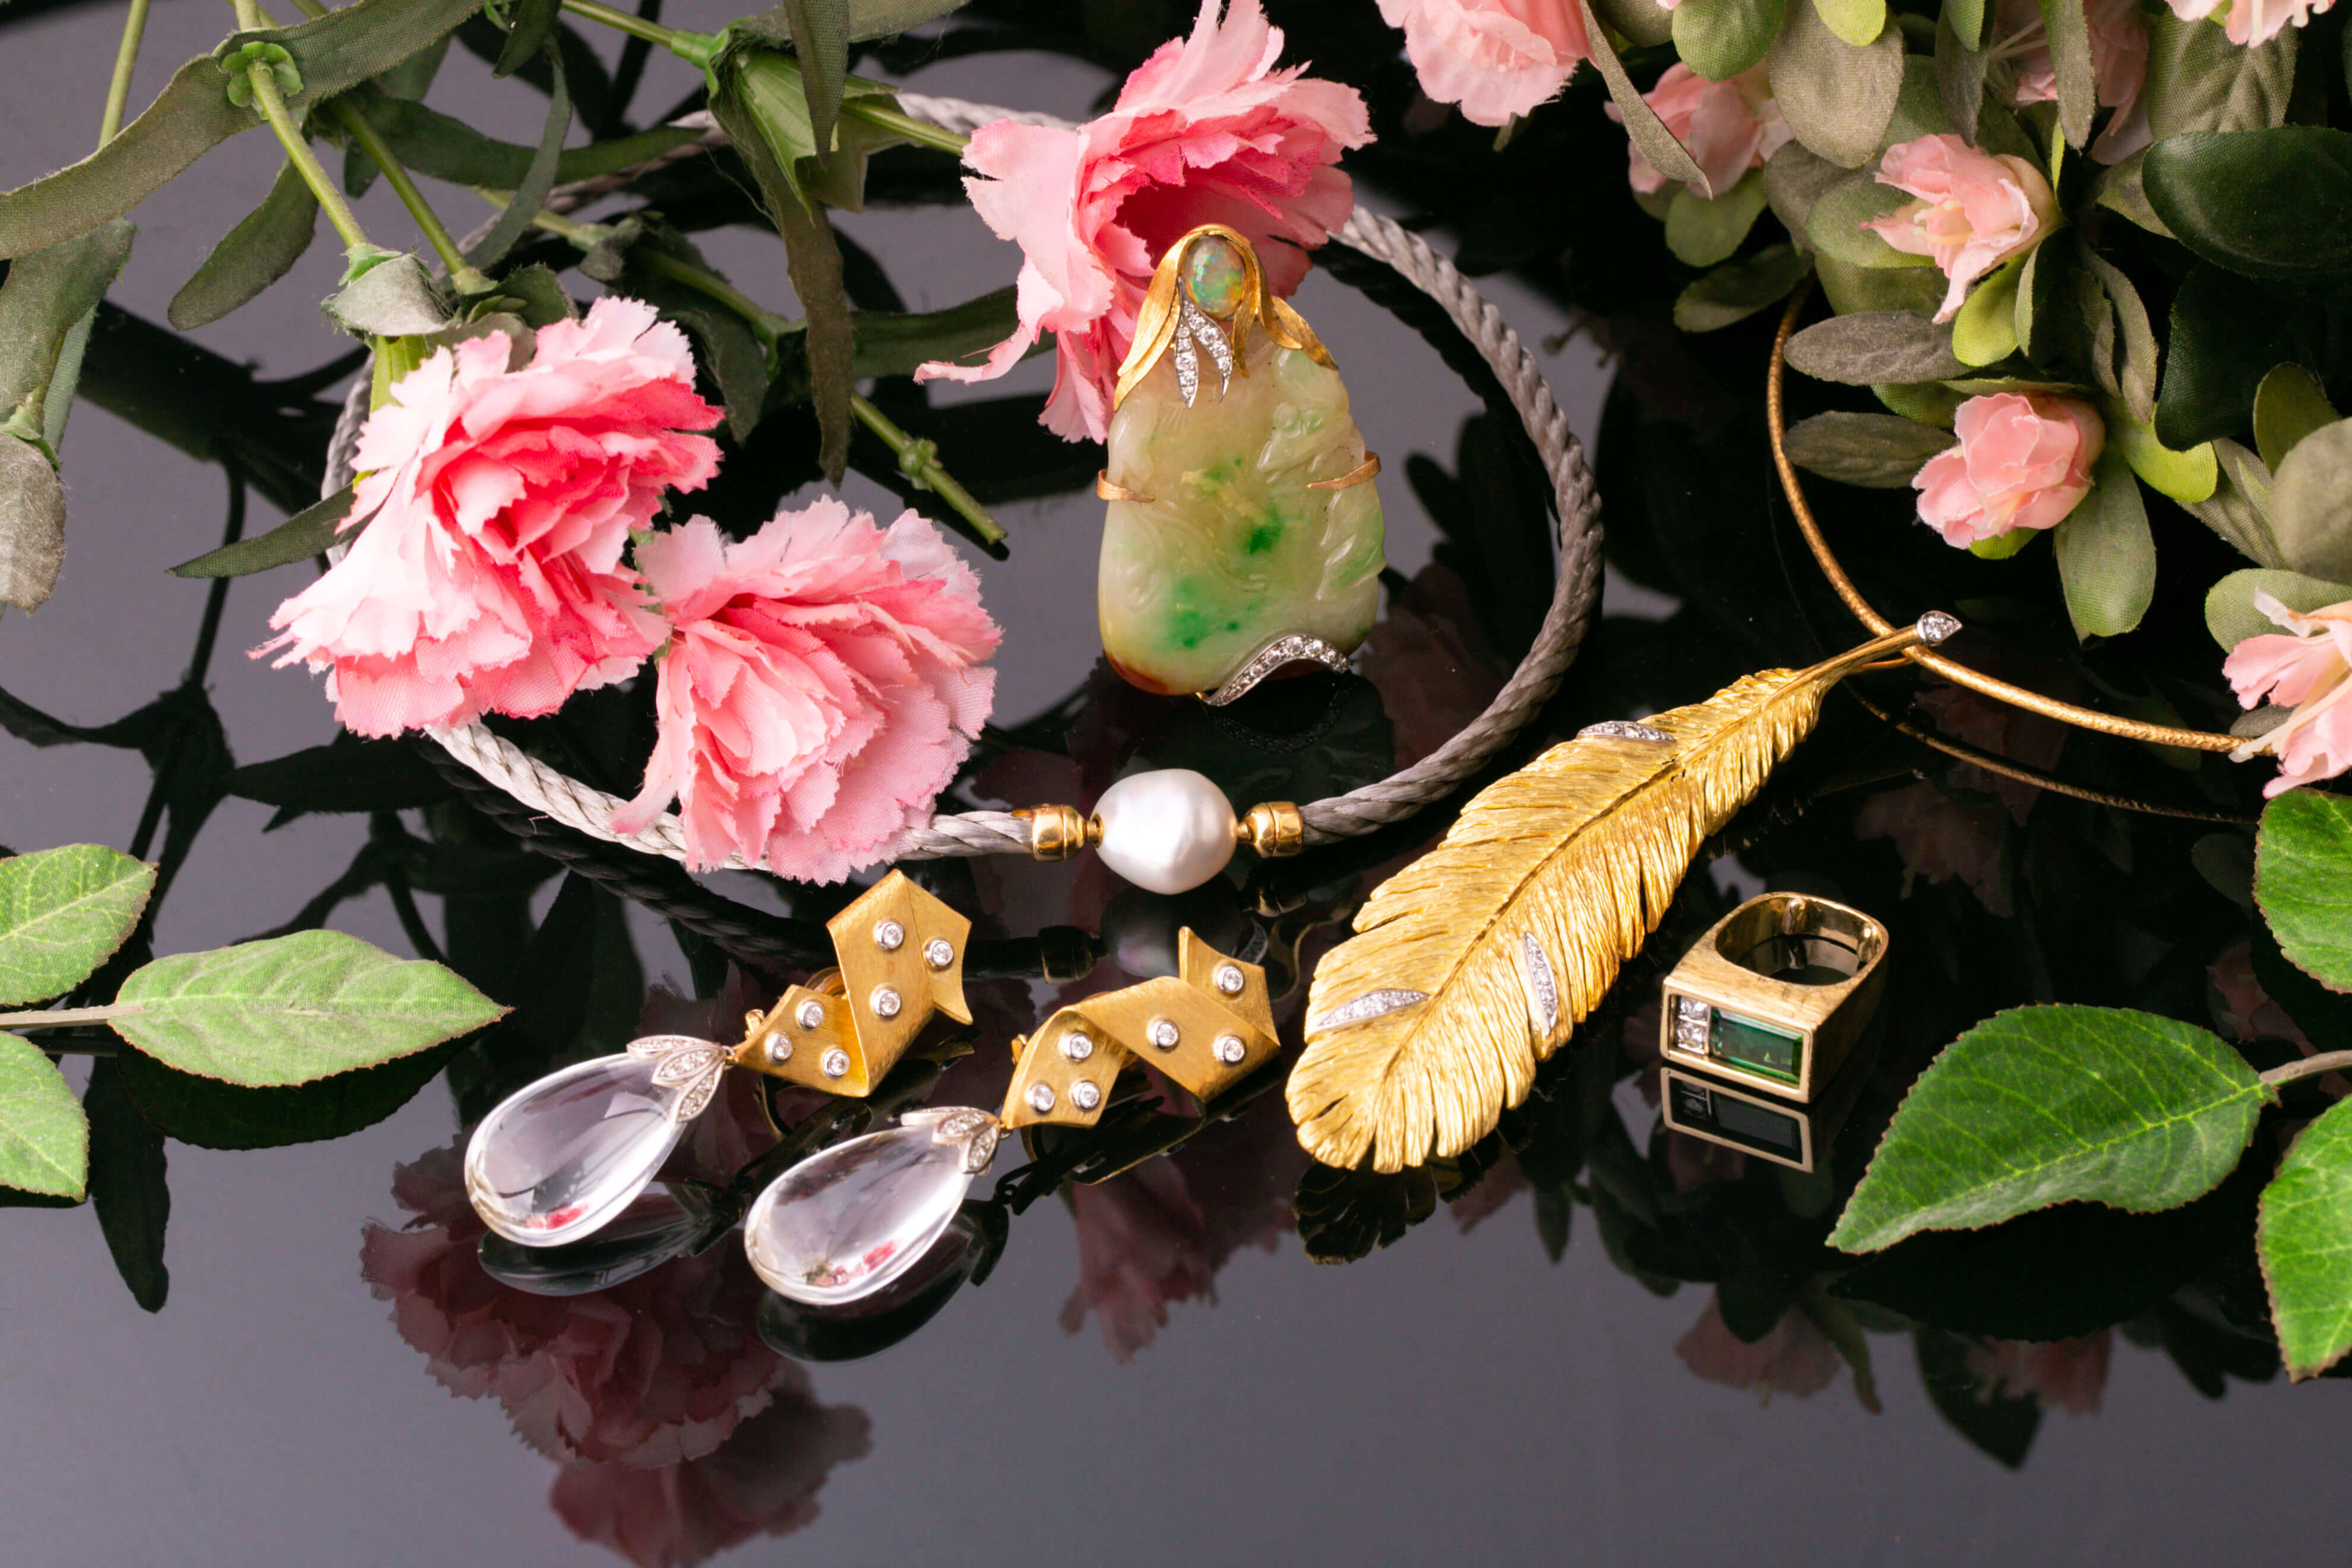 A collection of Grima Jewellery